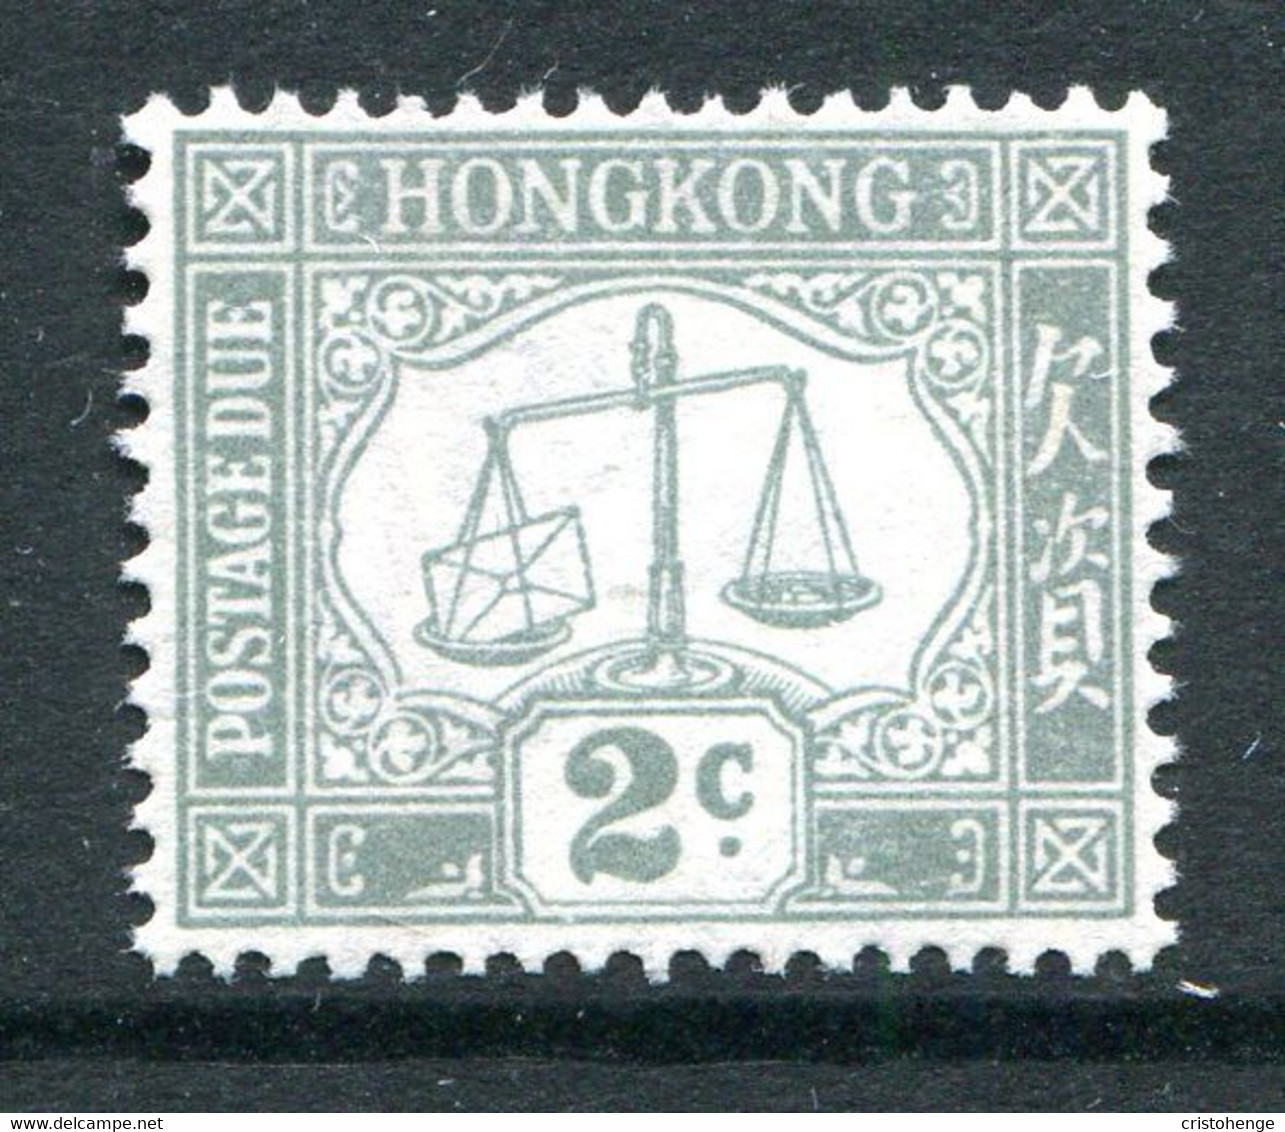 Hong Kong 1938-63 Postage Dues - 2c Grey - Ordinary Paper - MNH (SG D6) - Postage Due